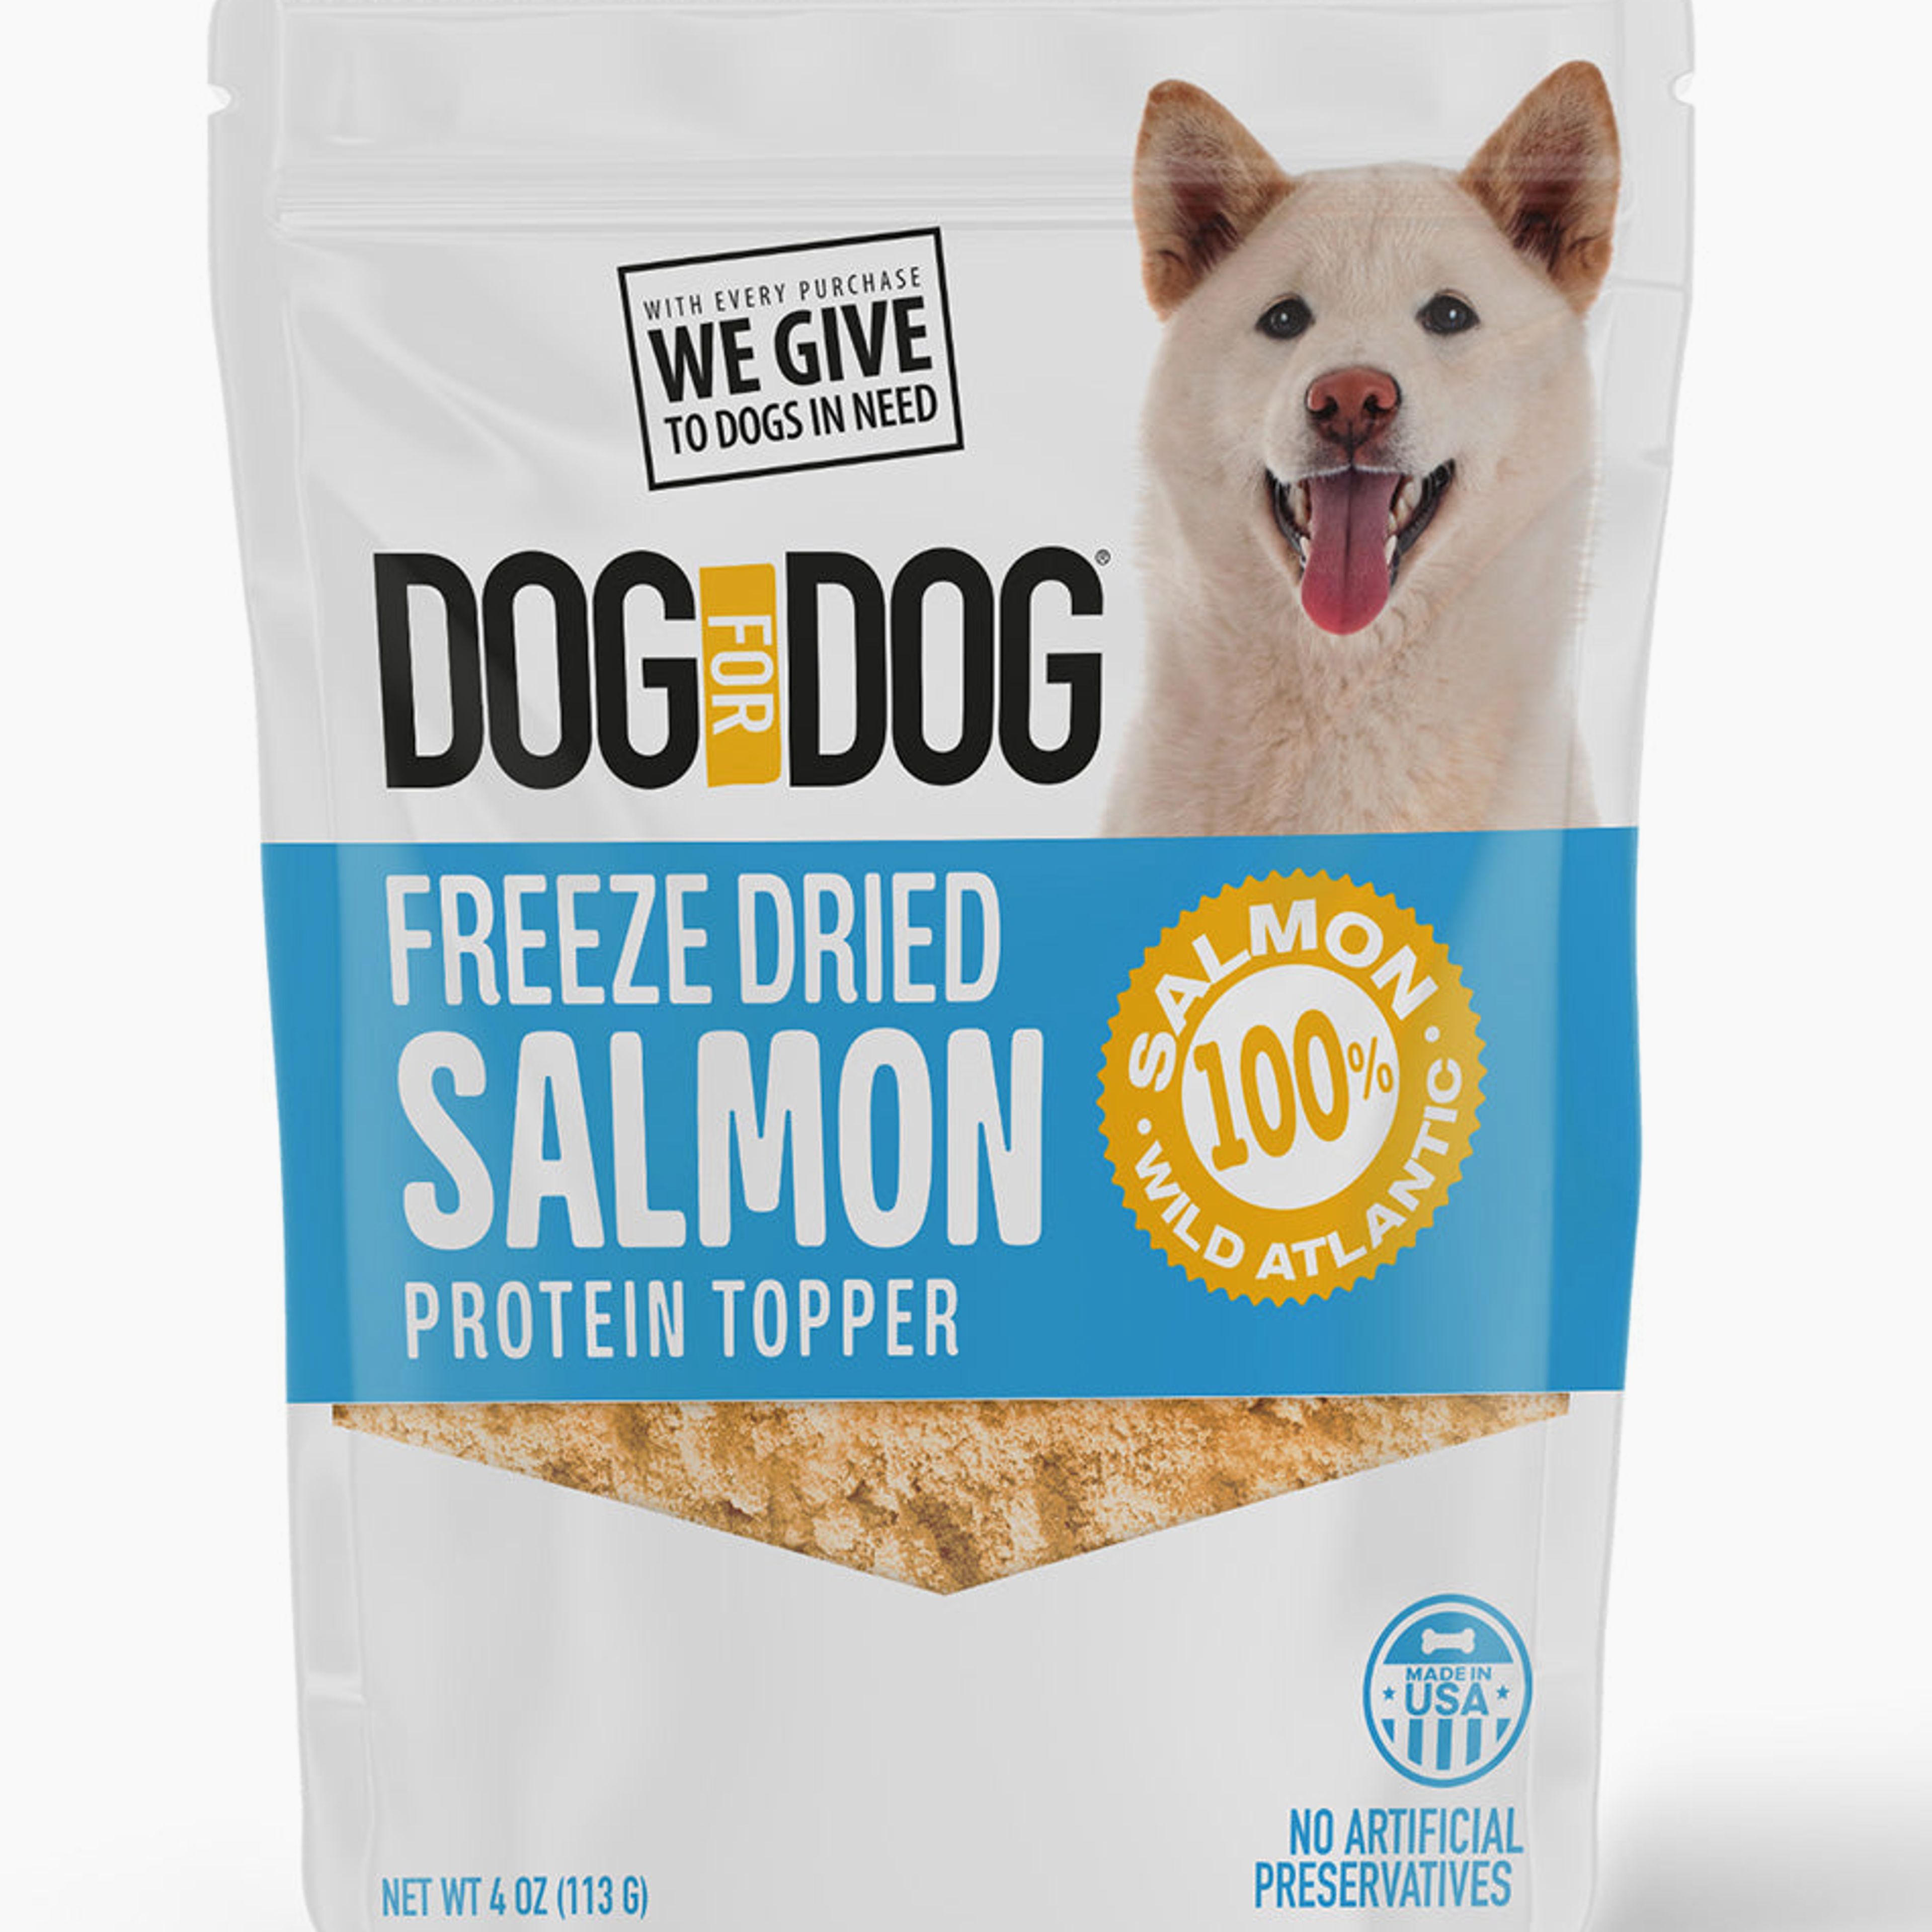 Freeze Dried Protein Topper Salmon